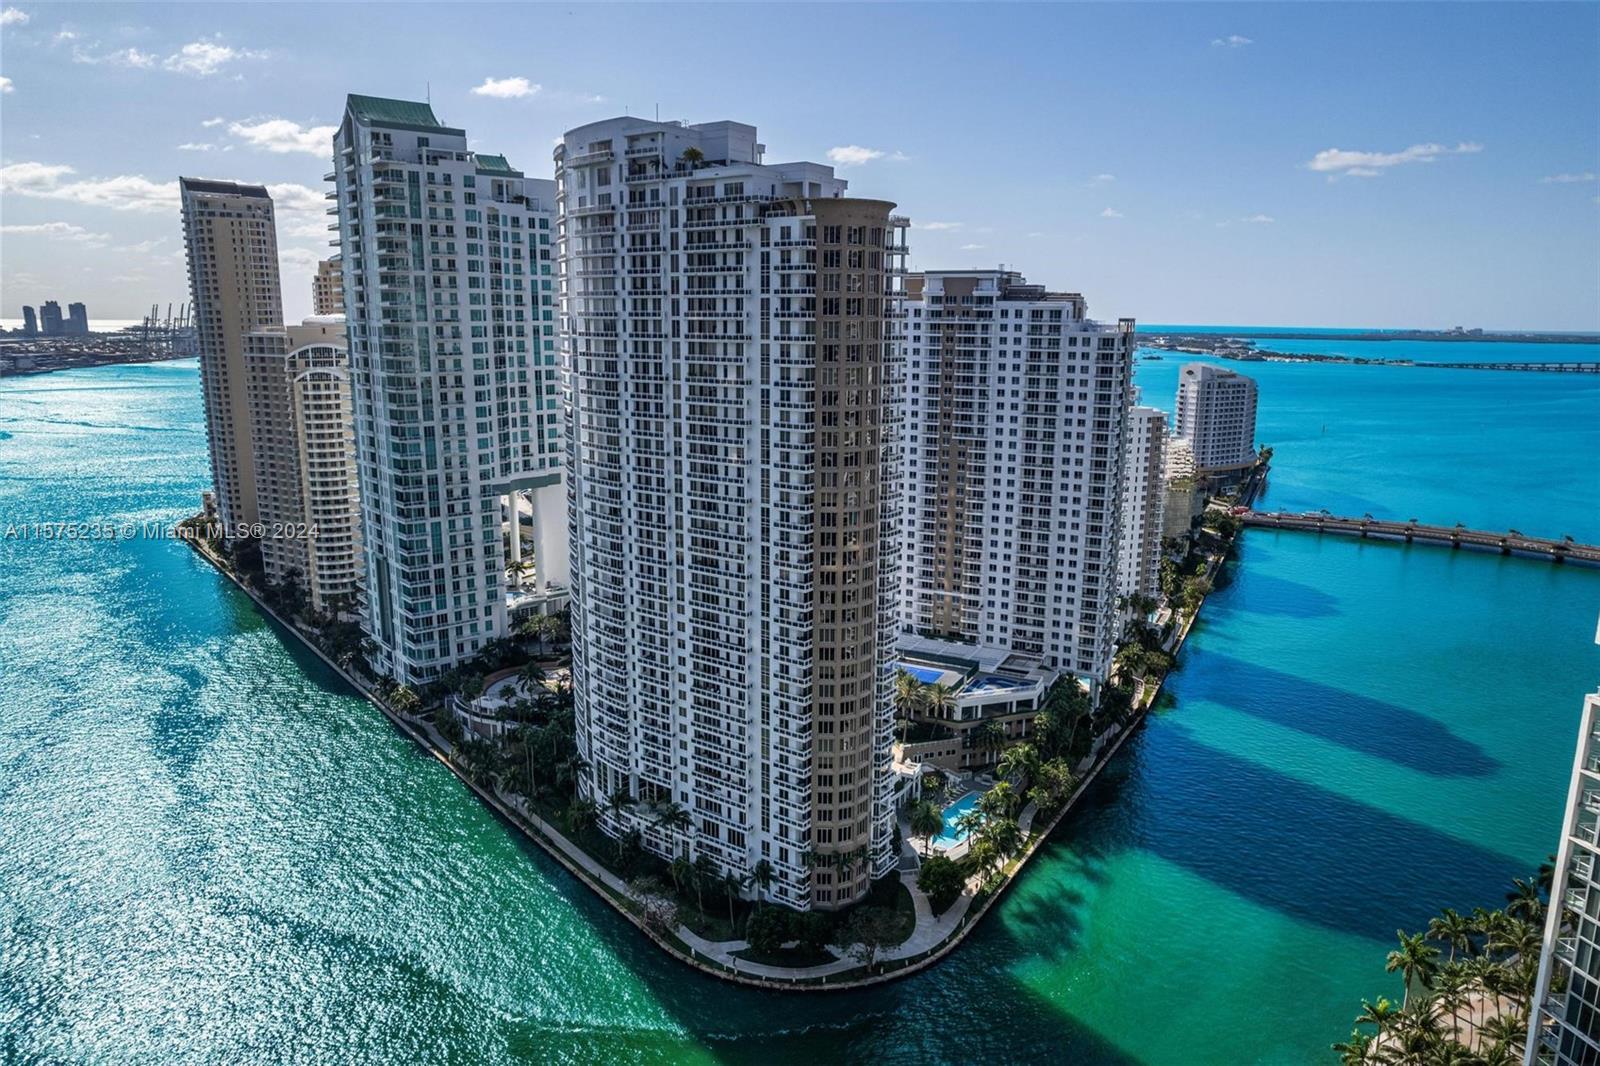 Welcome to this exceptional residence at Carbonell on the prestigious Brickell Key, where luxury liv